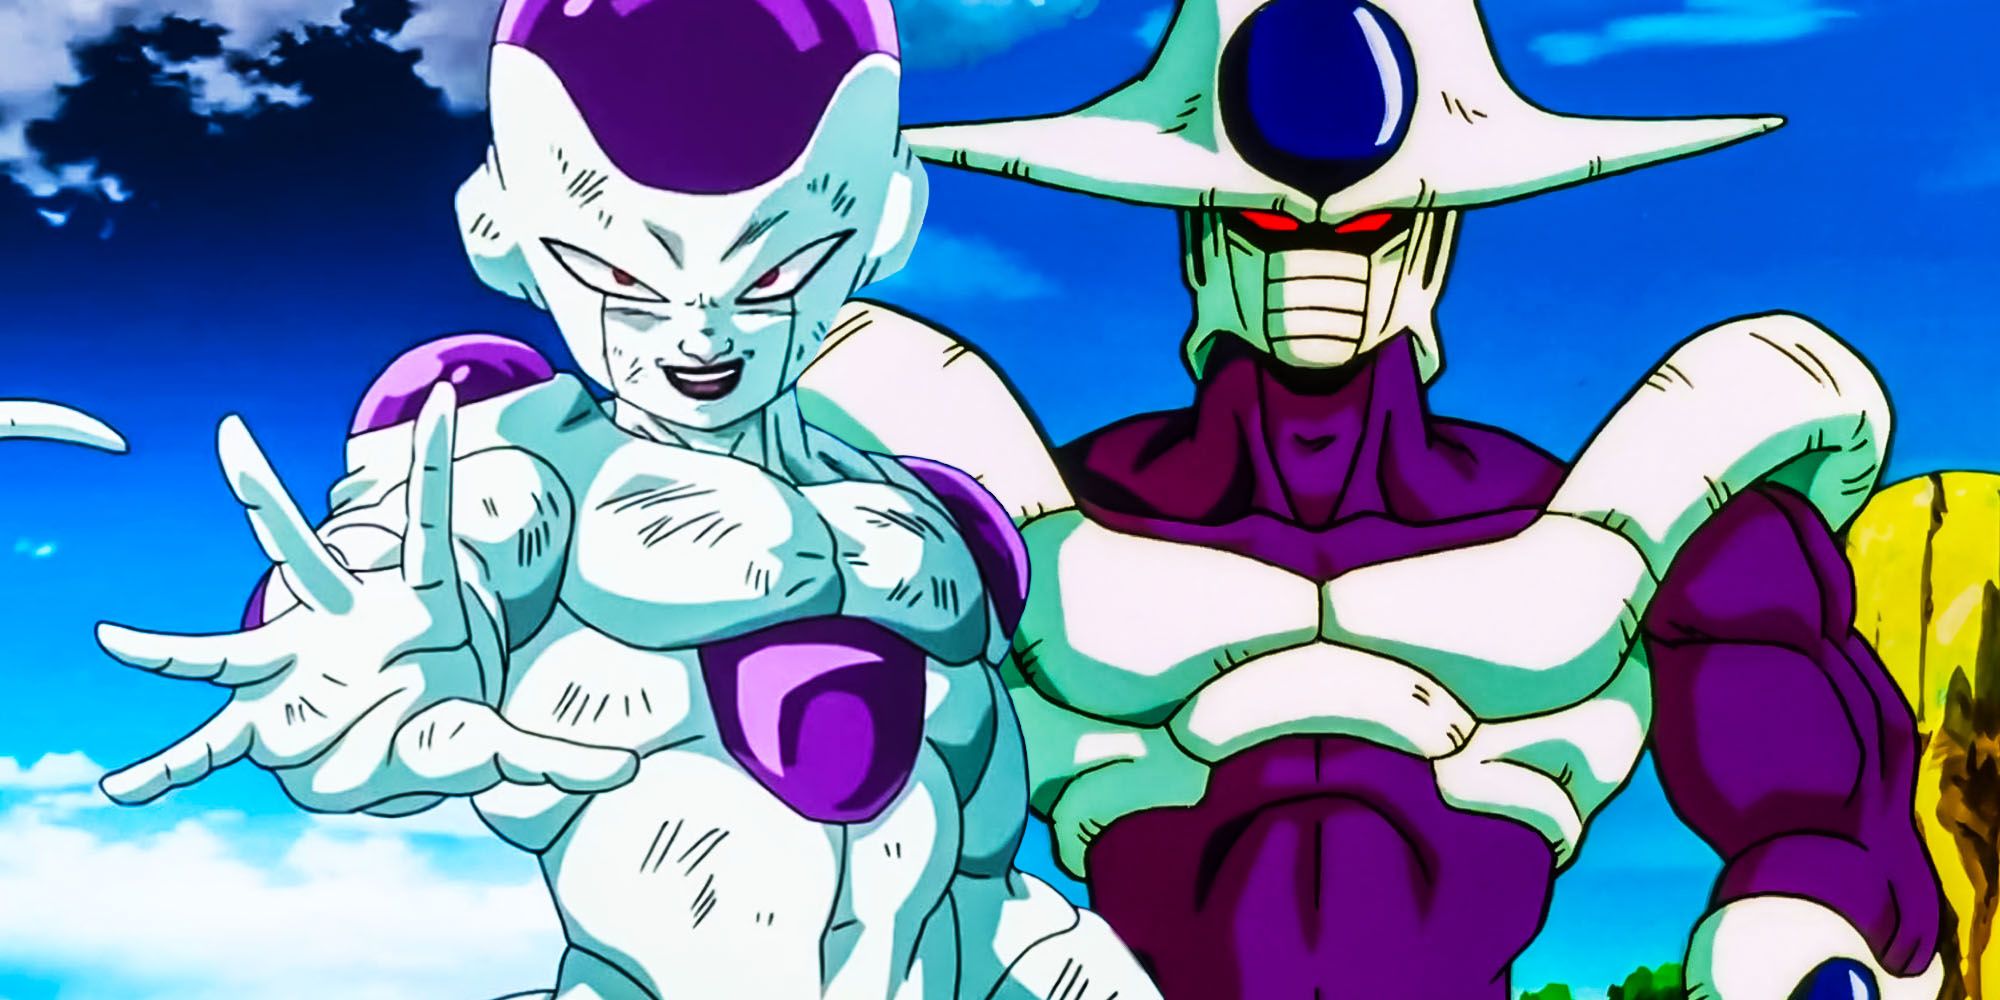 dragon-ball-z-why-cooler-frieza-have-different-transformations